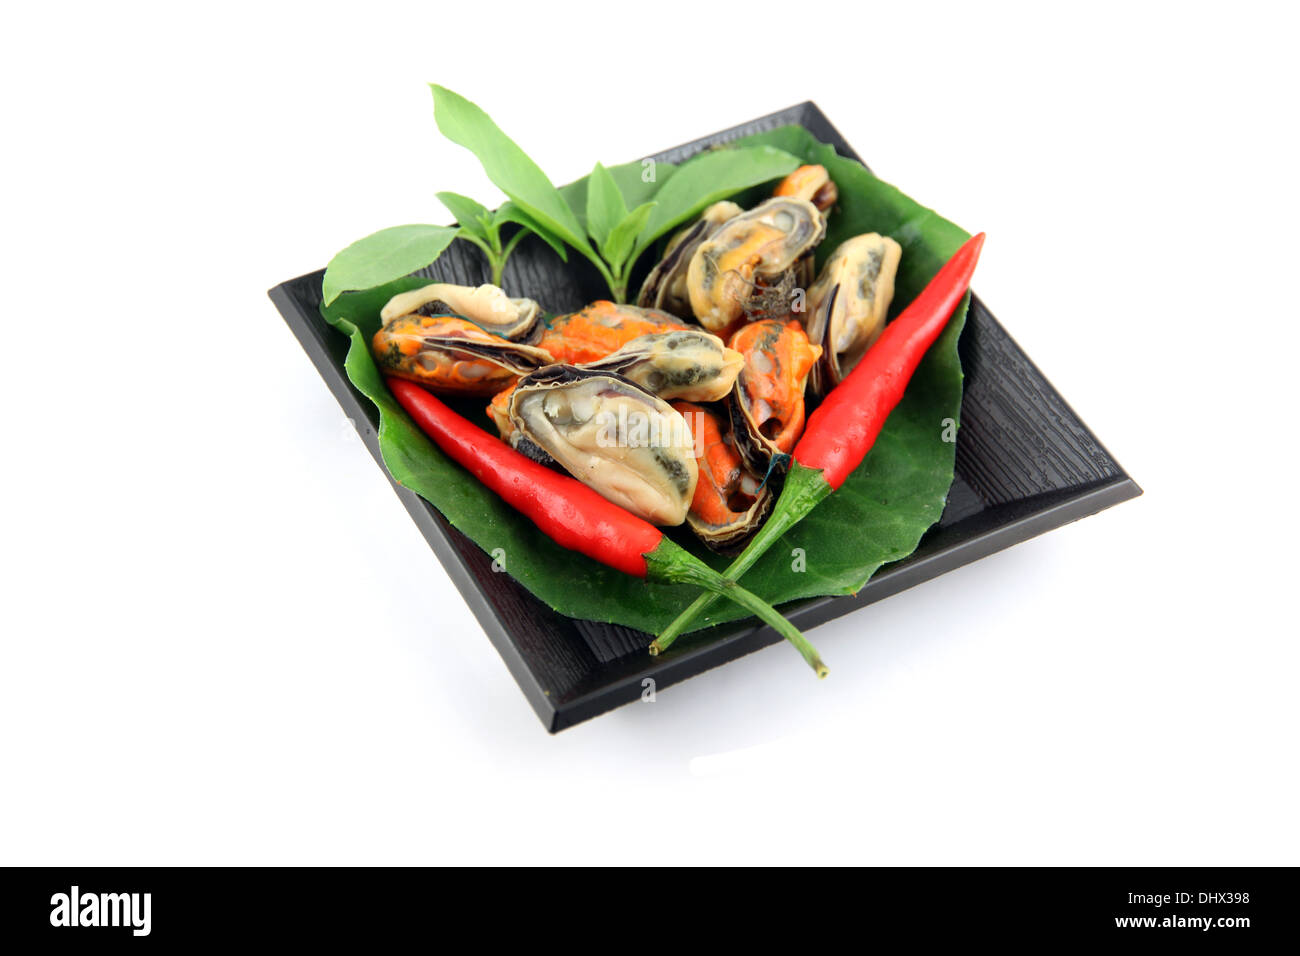 Mussels and red paprika in the black dish on white background. Stock Photo